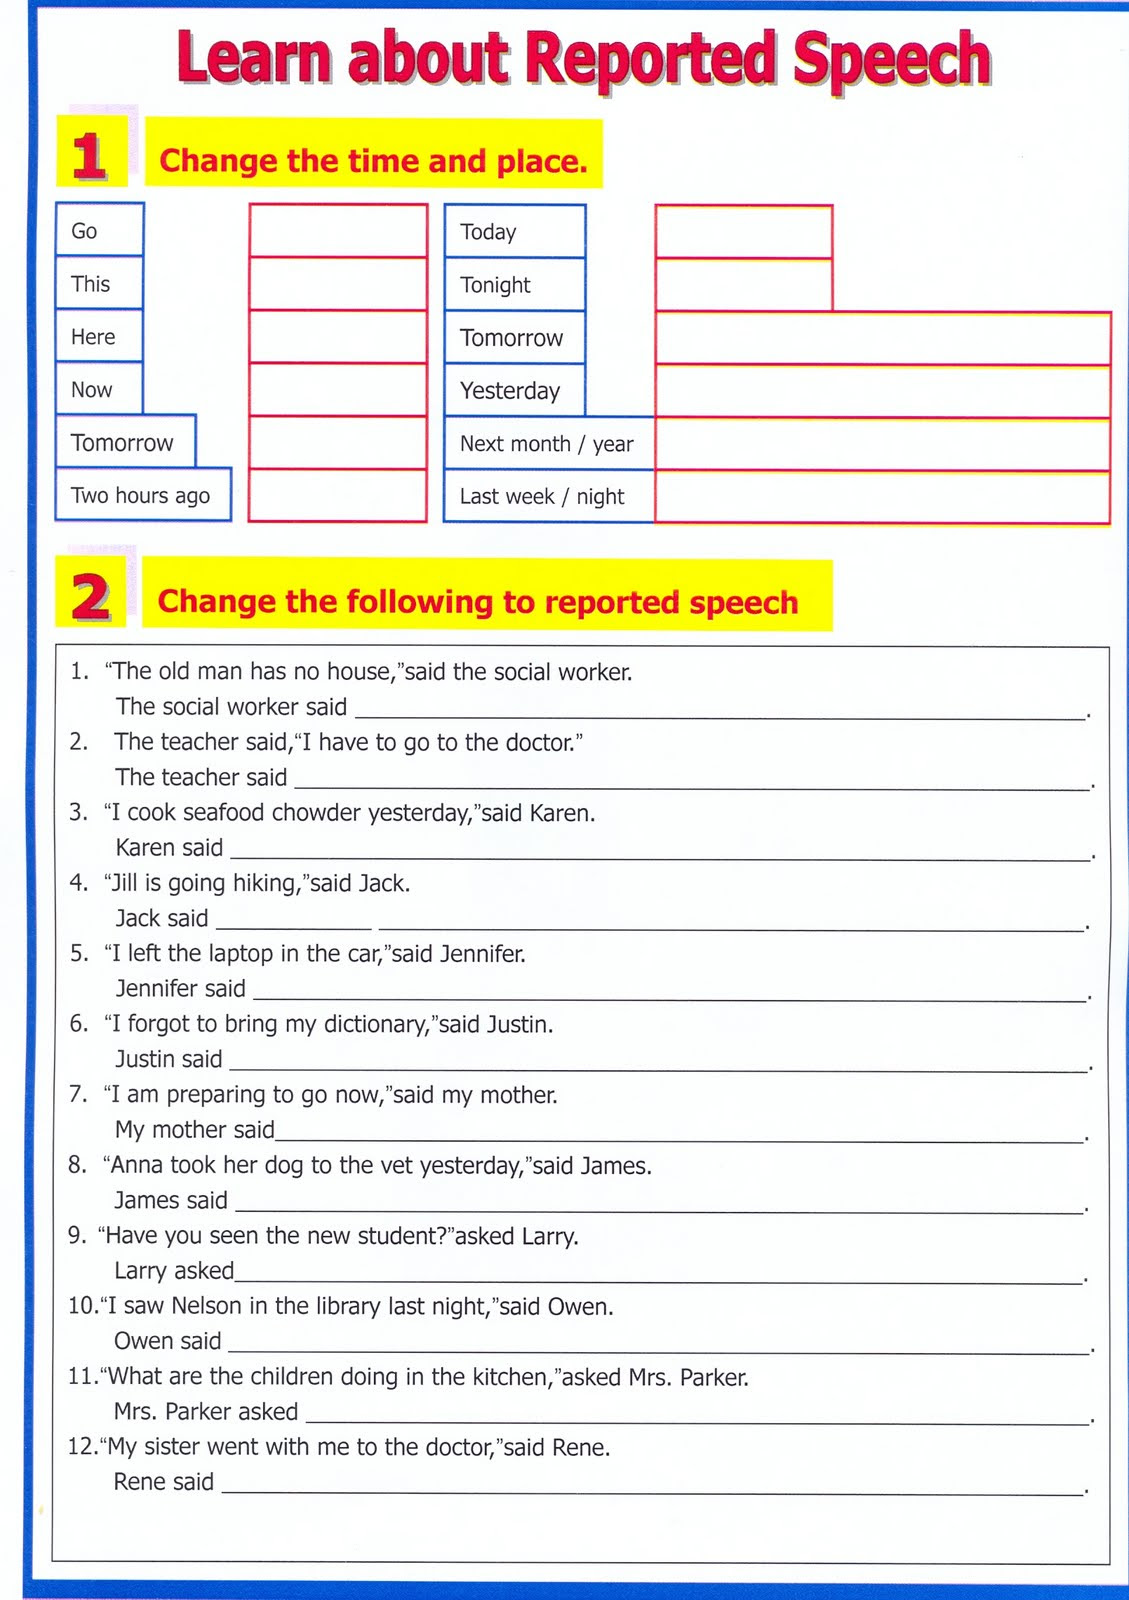 reported speech dialogue exercises for class 10 cbse with answers